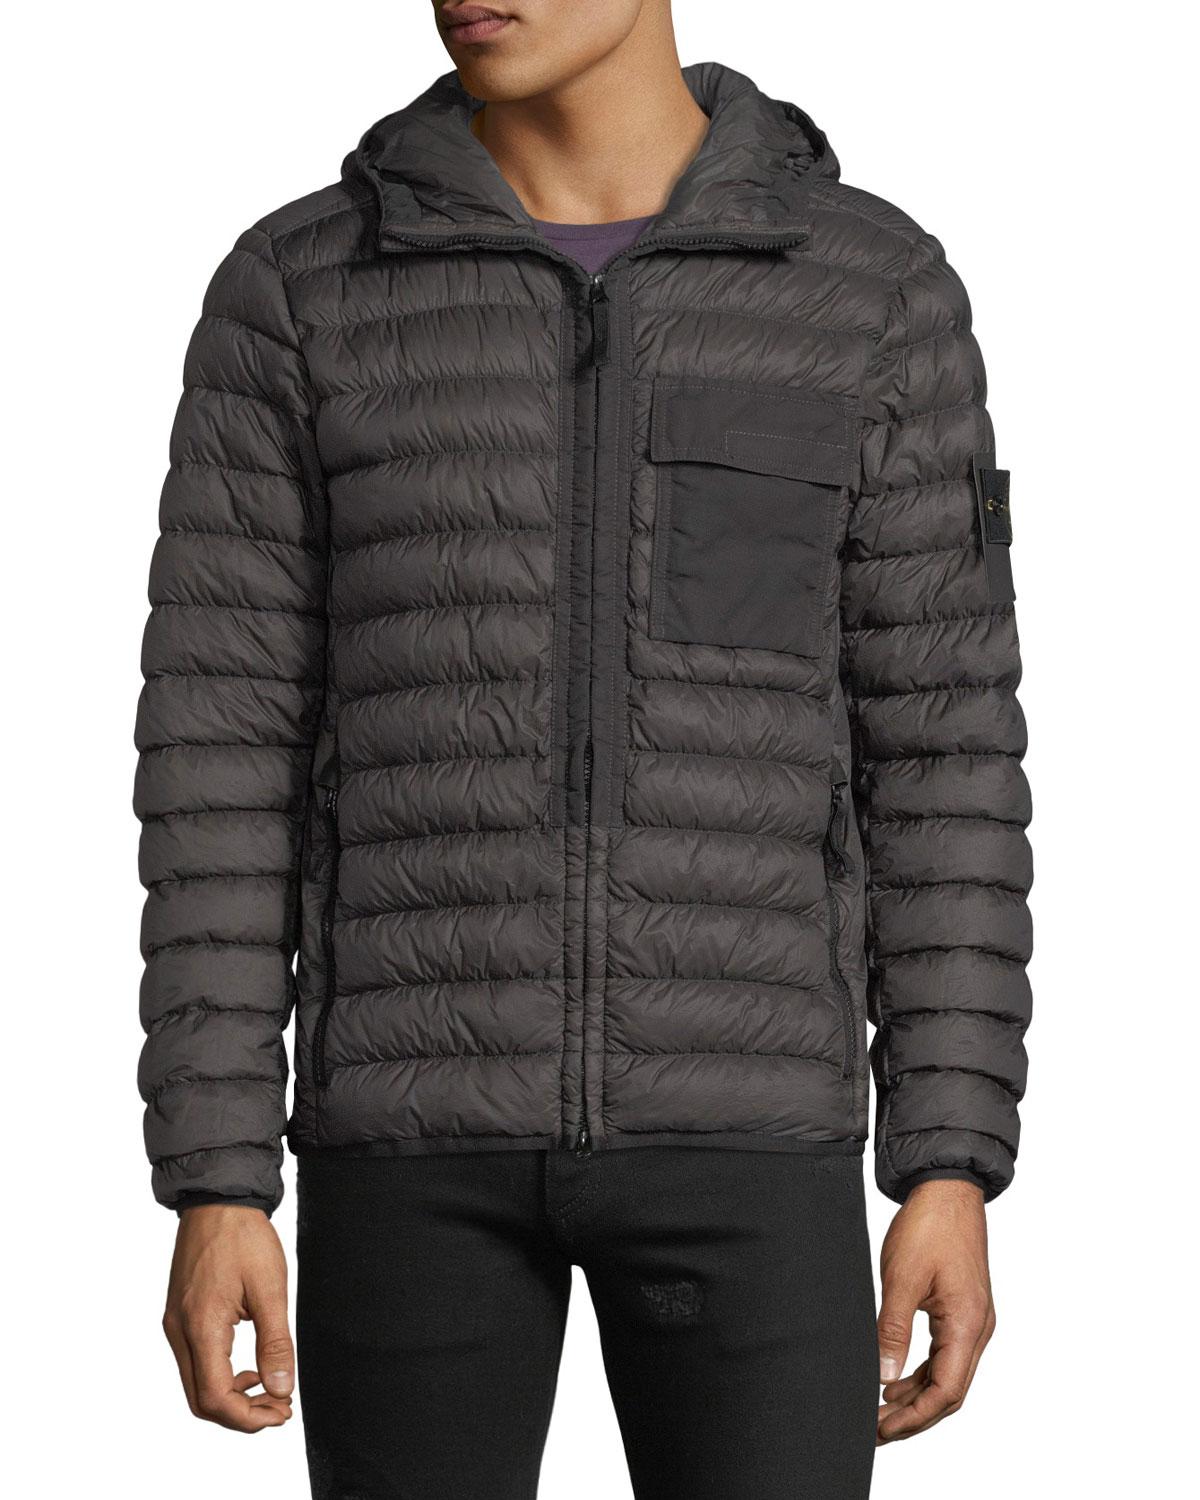 Stone Island Men's Quilted Lightweight Down Jacket in Gray for Men - Lyst